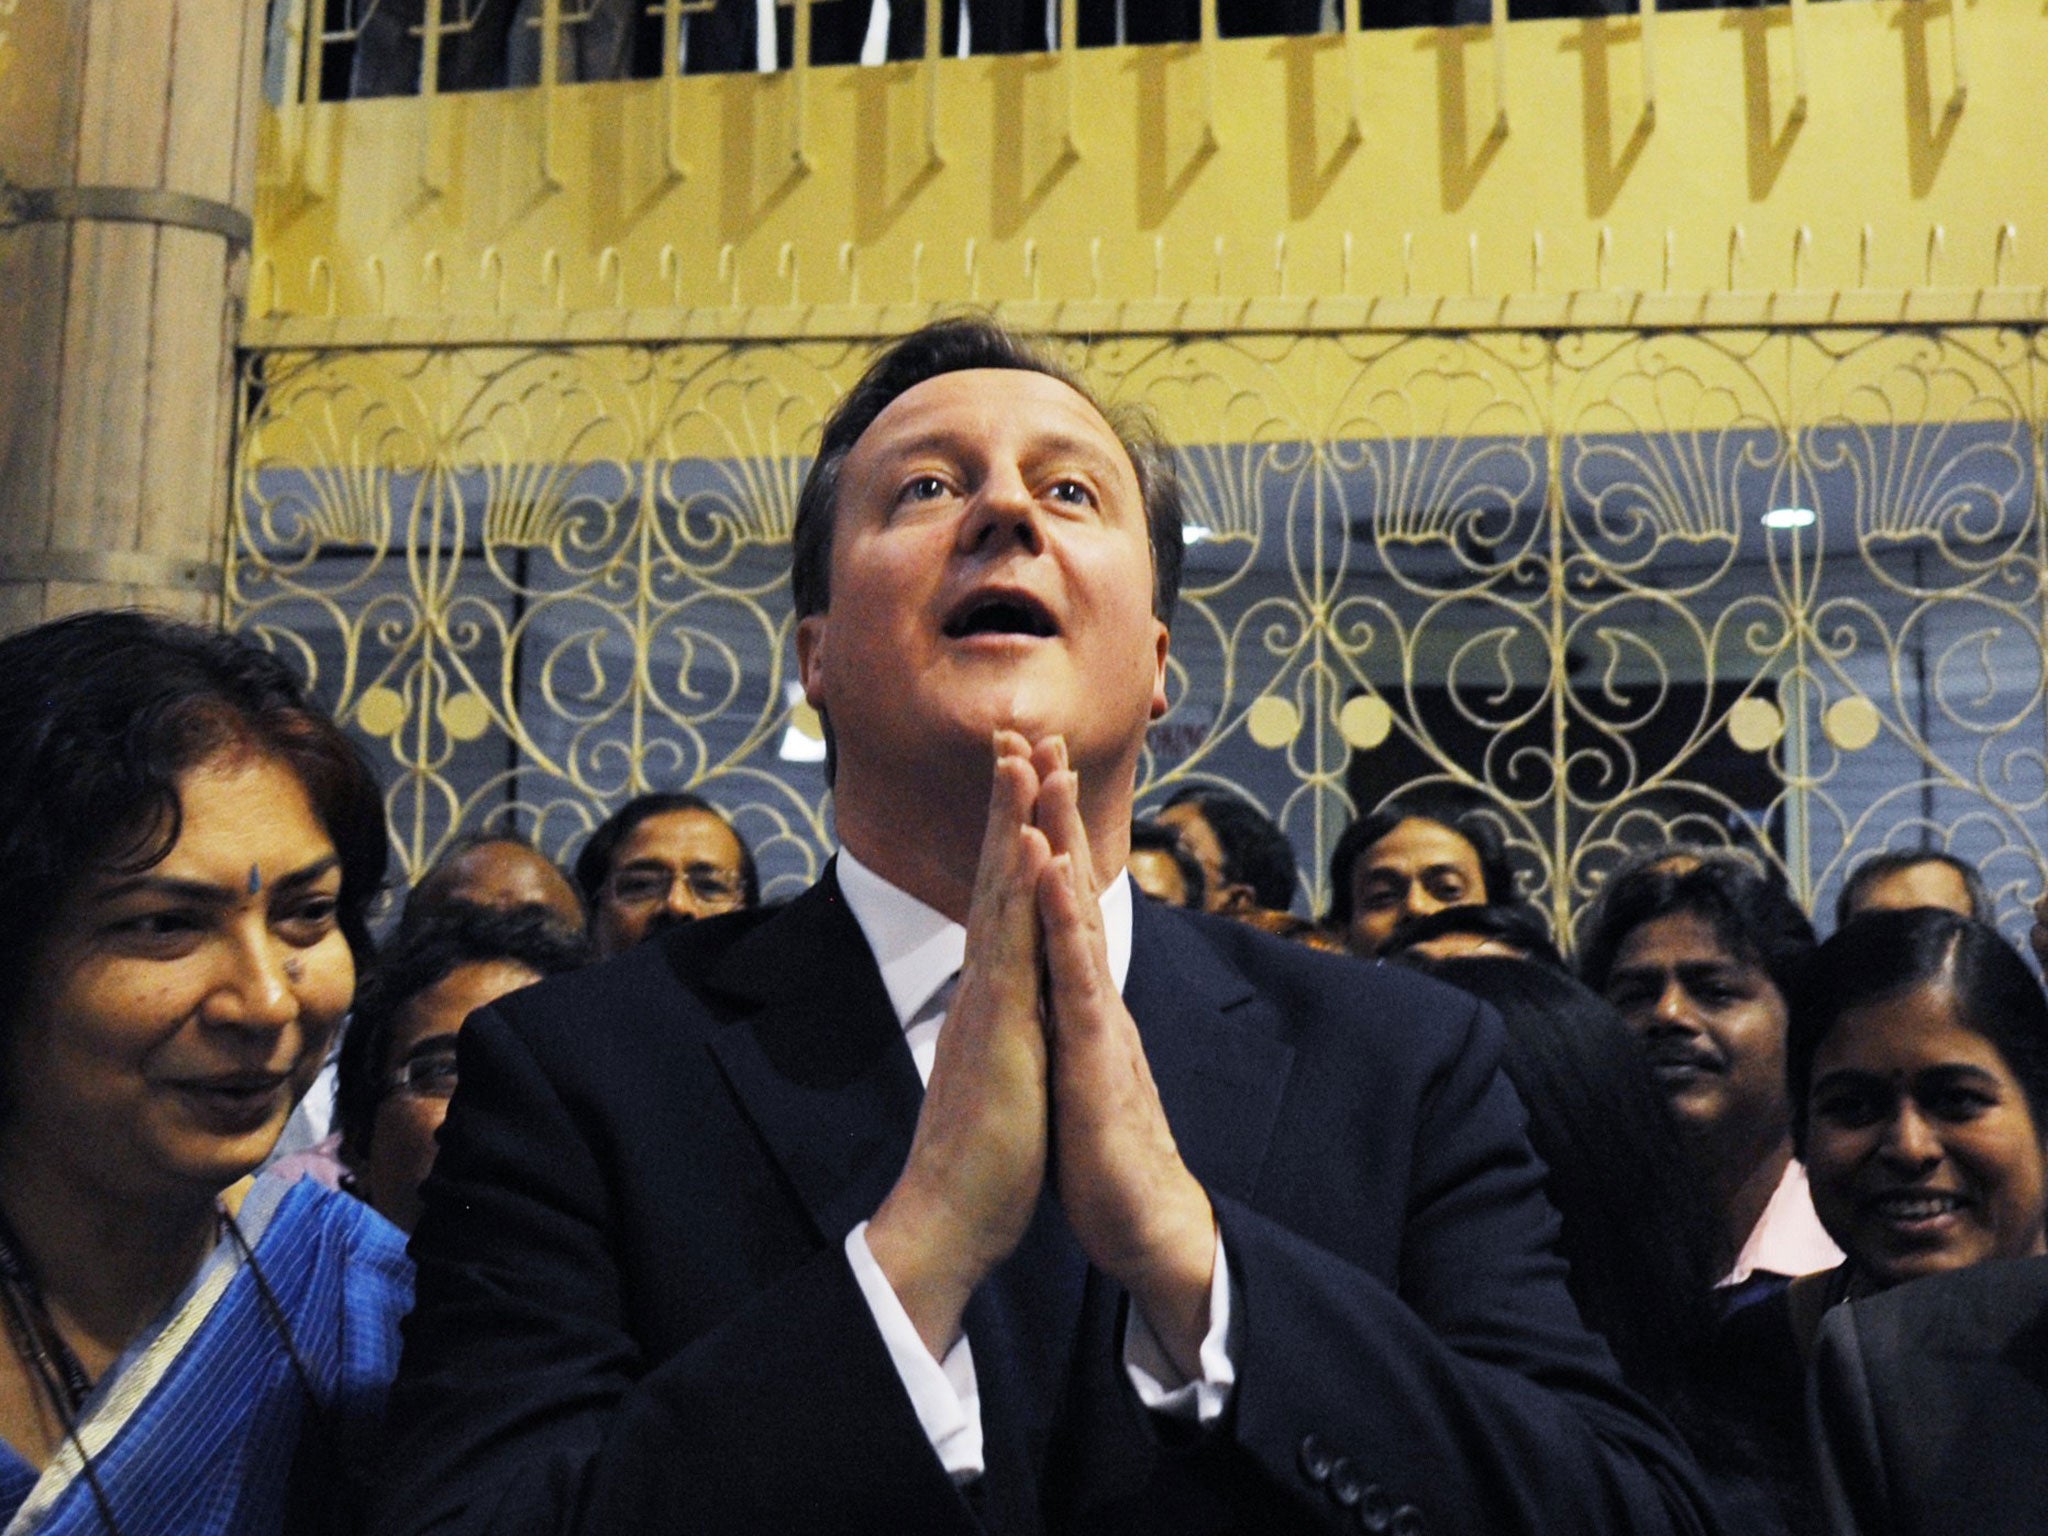 Prime Minister David Cameron meets staff at Air Radio in Kolkata, India, following his interview by the radio station